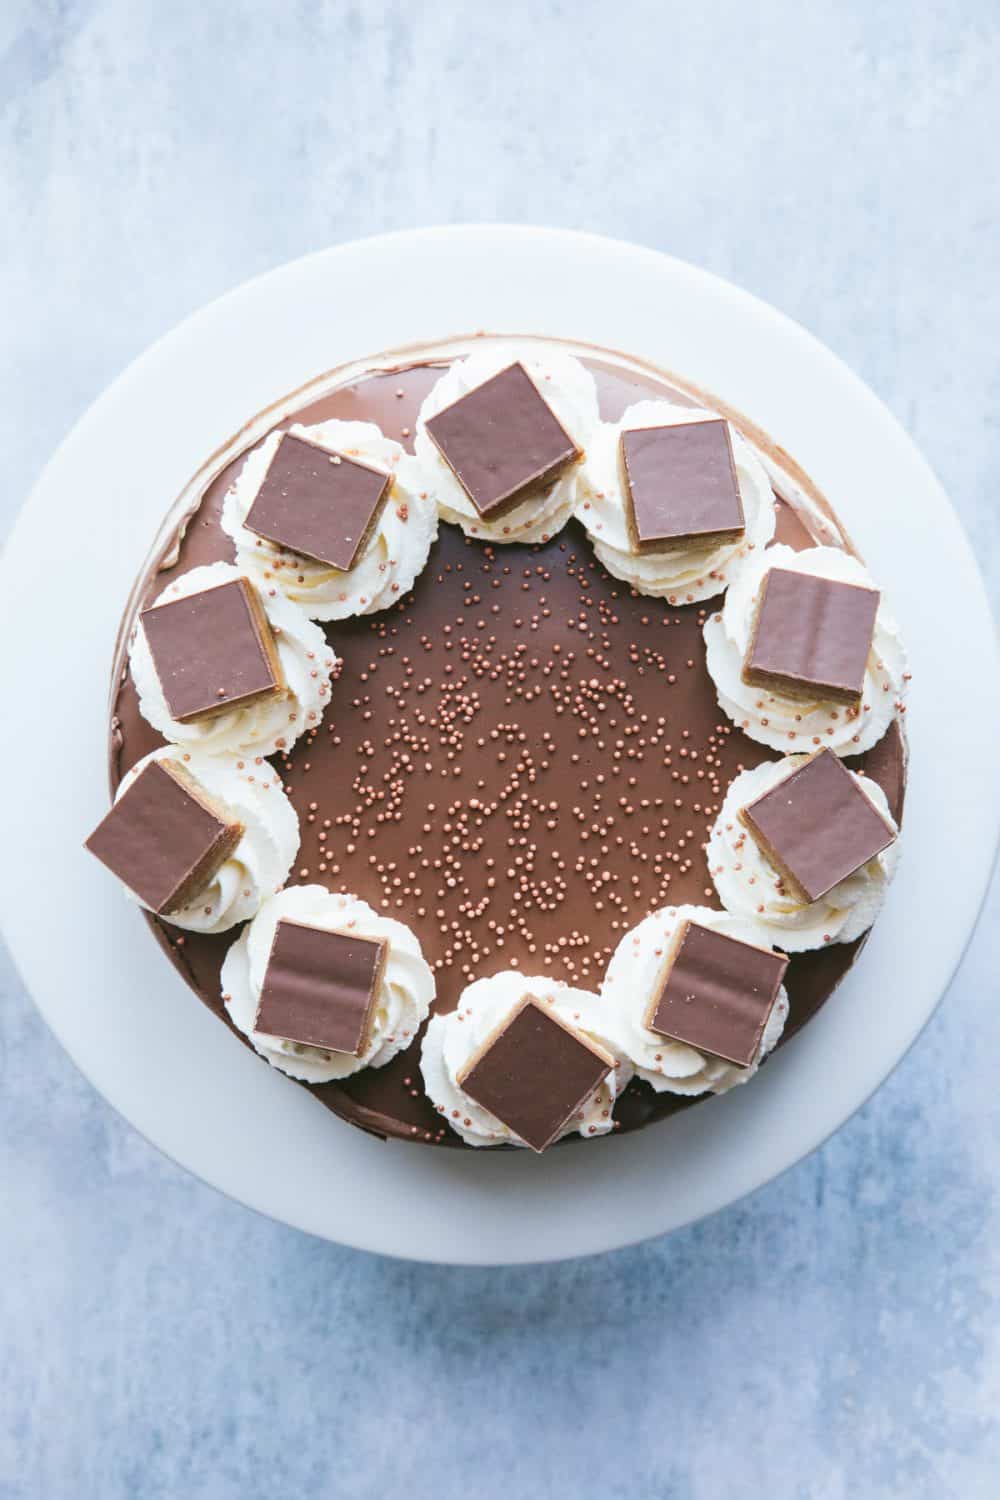 A Millionaire's Cheesecake with piped whipped cream and 10 individual squares of Millionaire's shortbread on top. 